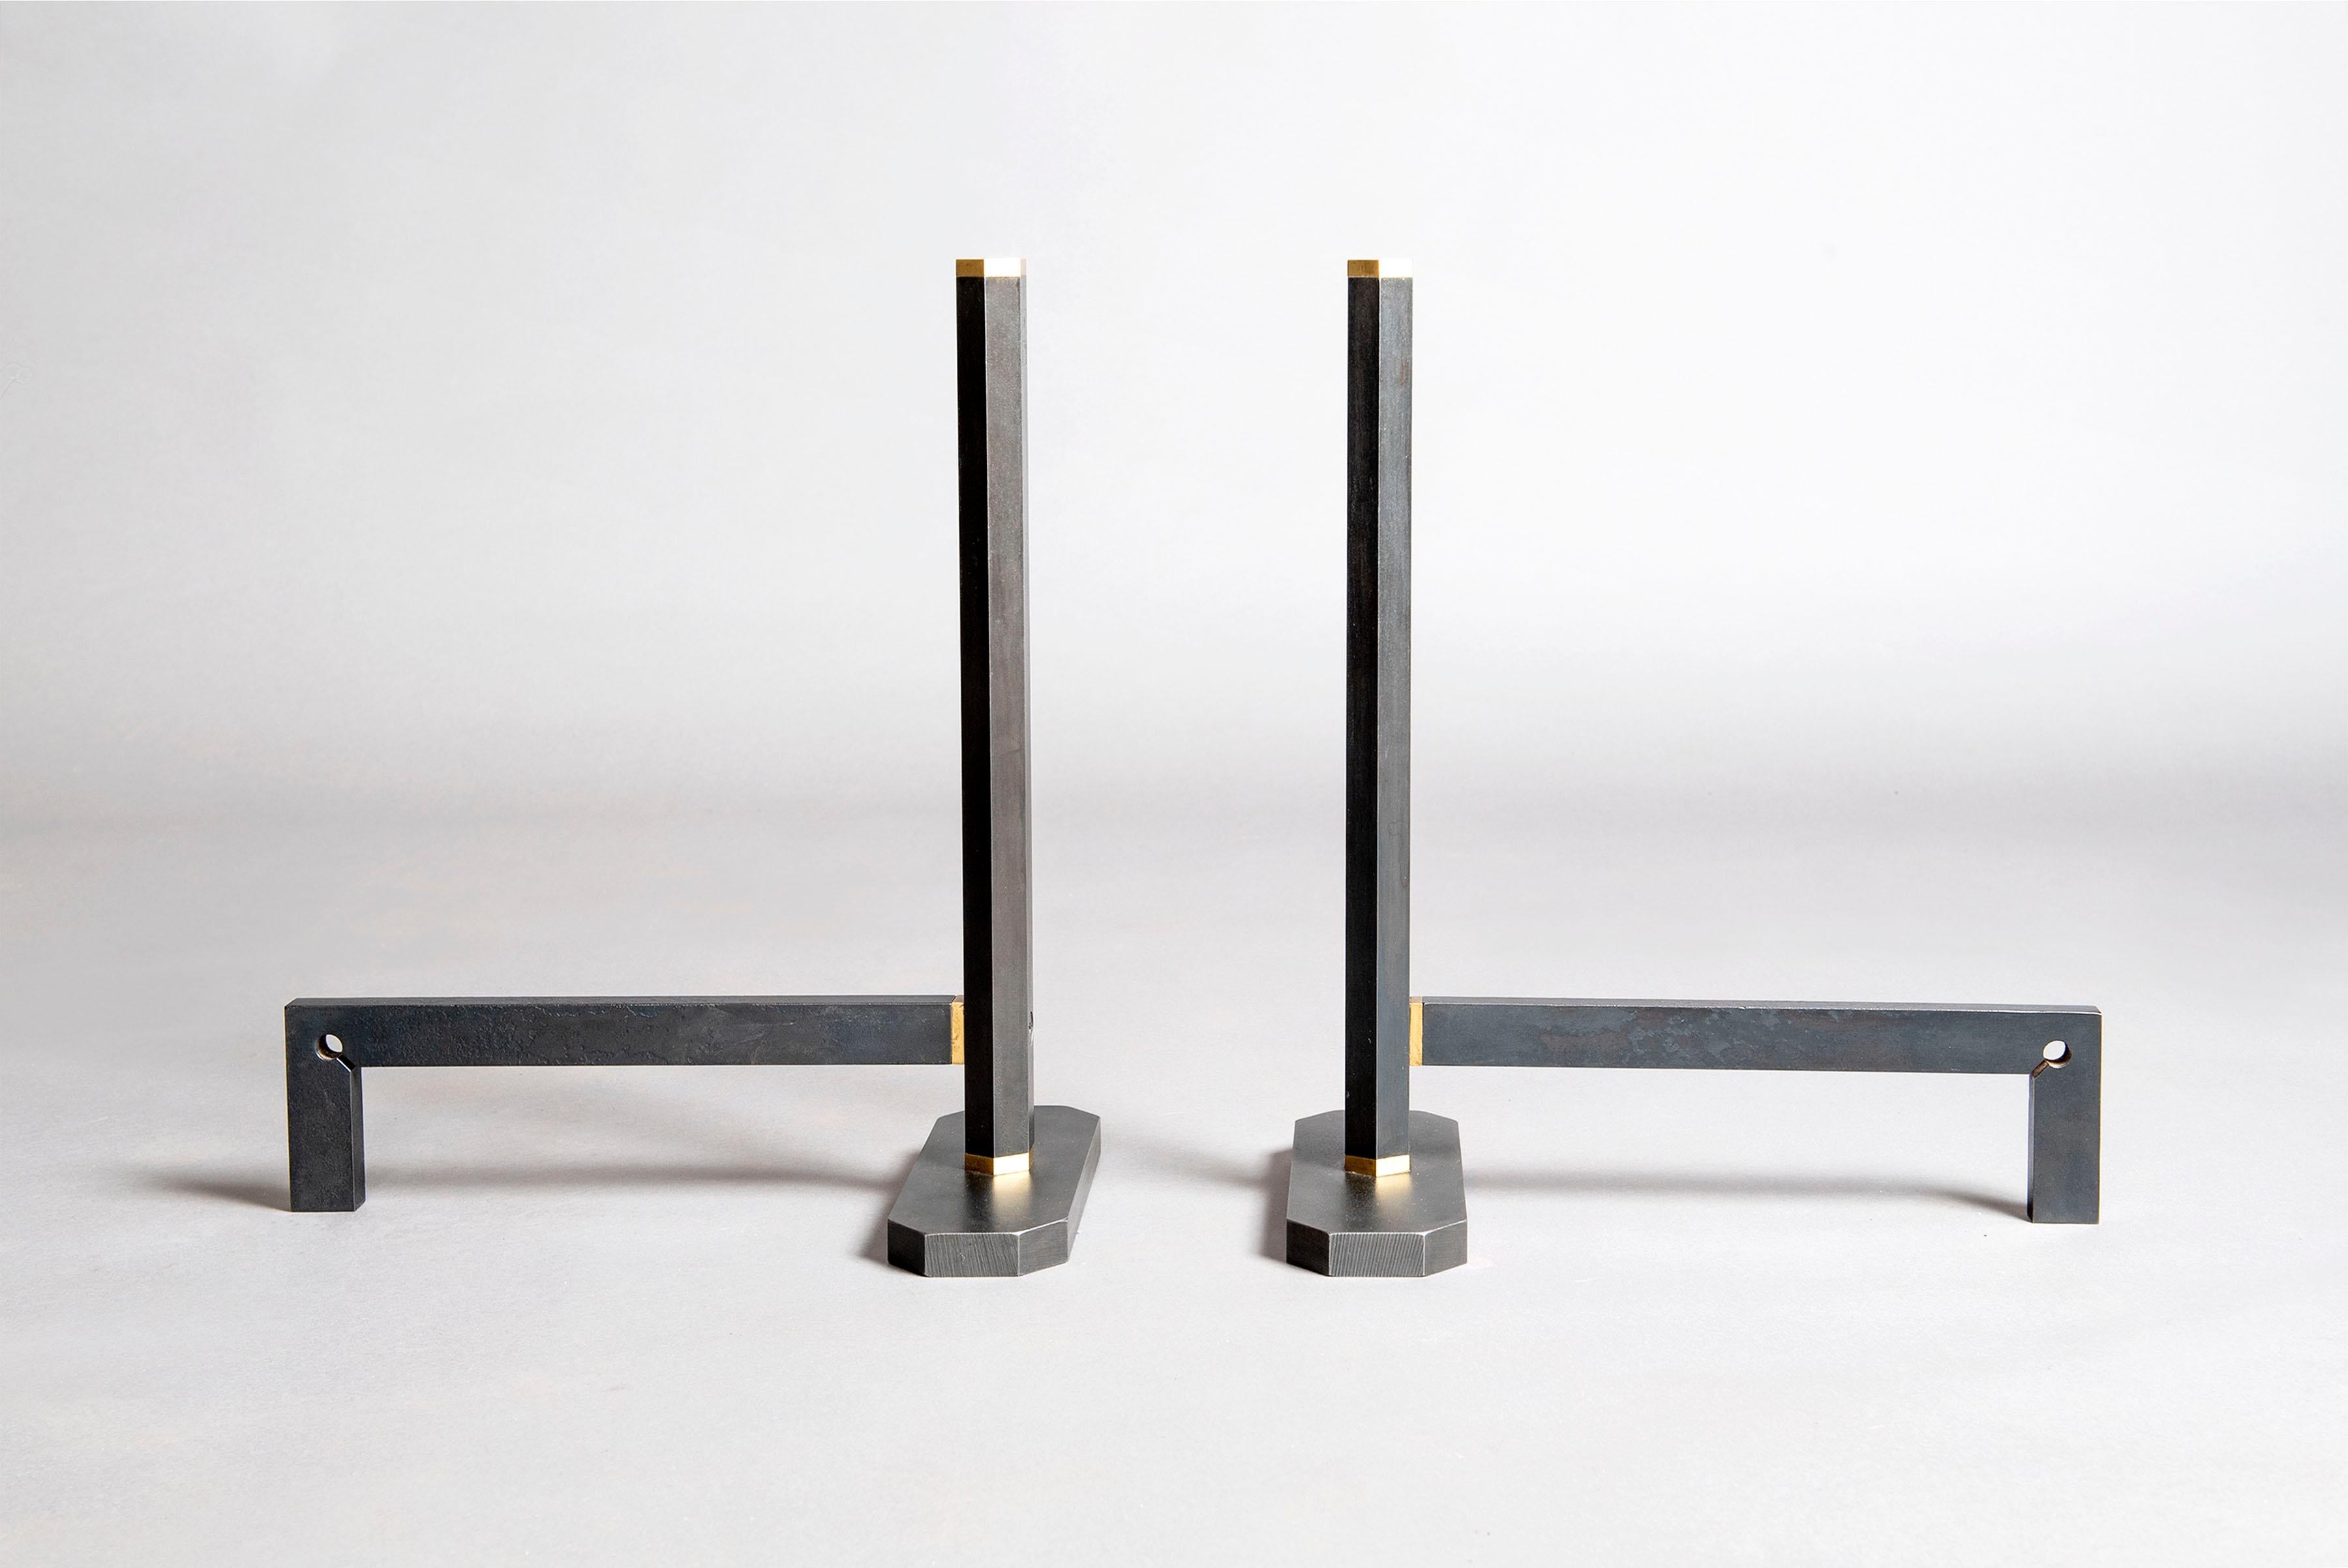 These beautifully restored andirons are in mint condition. The Scarpa touch mark is clearly visible. They are made of iron and brass. Ready for decorative or functional use.